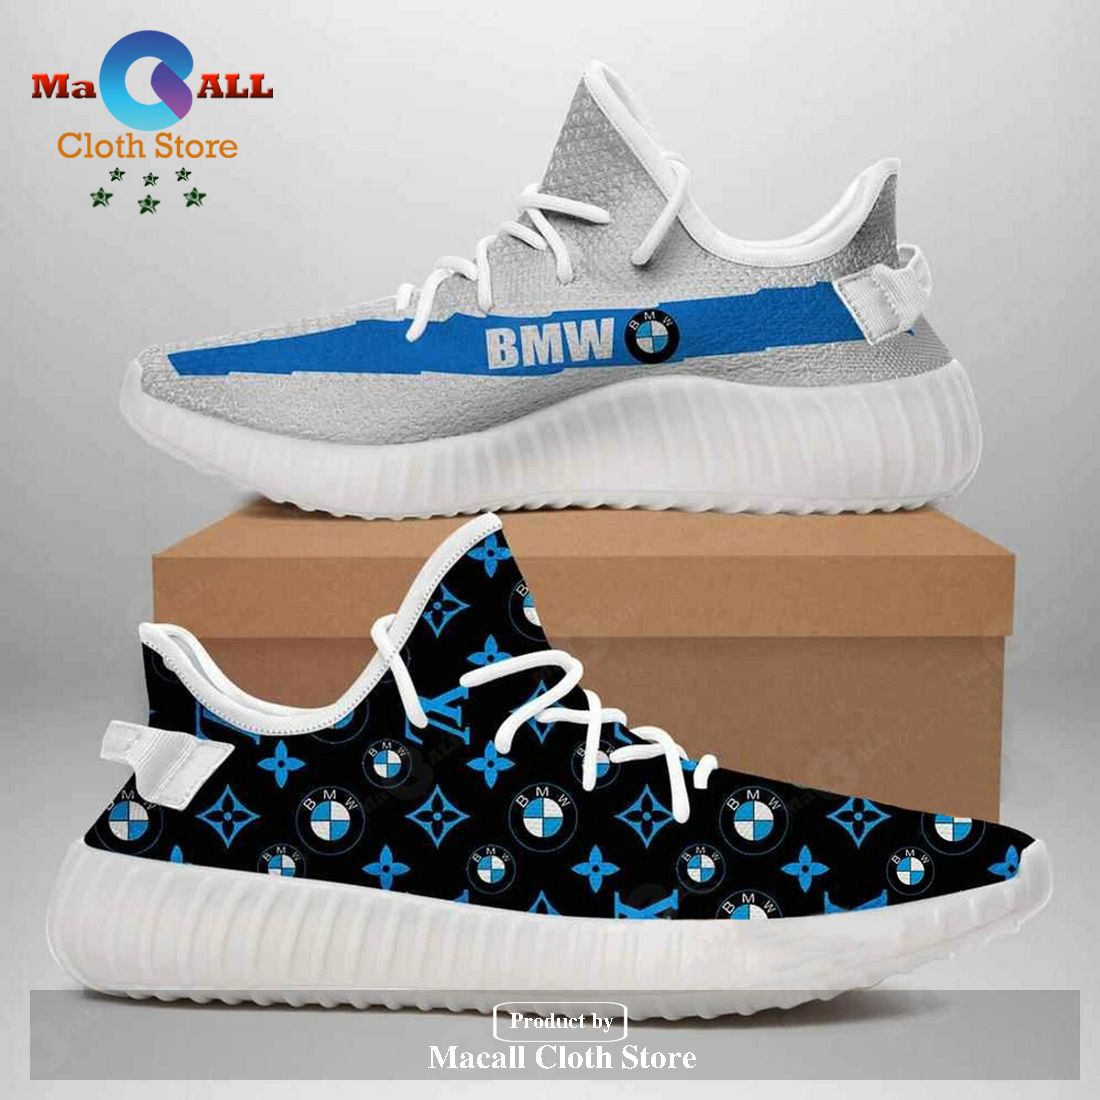 Louis Vuitton Bmw Yeezy Boost Shoes Sport Sneakers Luxury Brand For Men And  Women - Macall Cloth Store - Destination for fashionistas